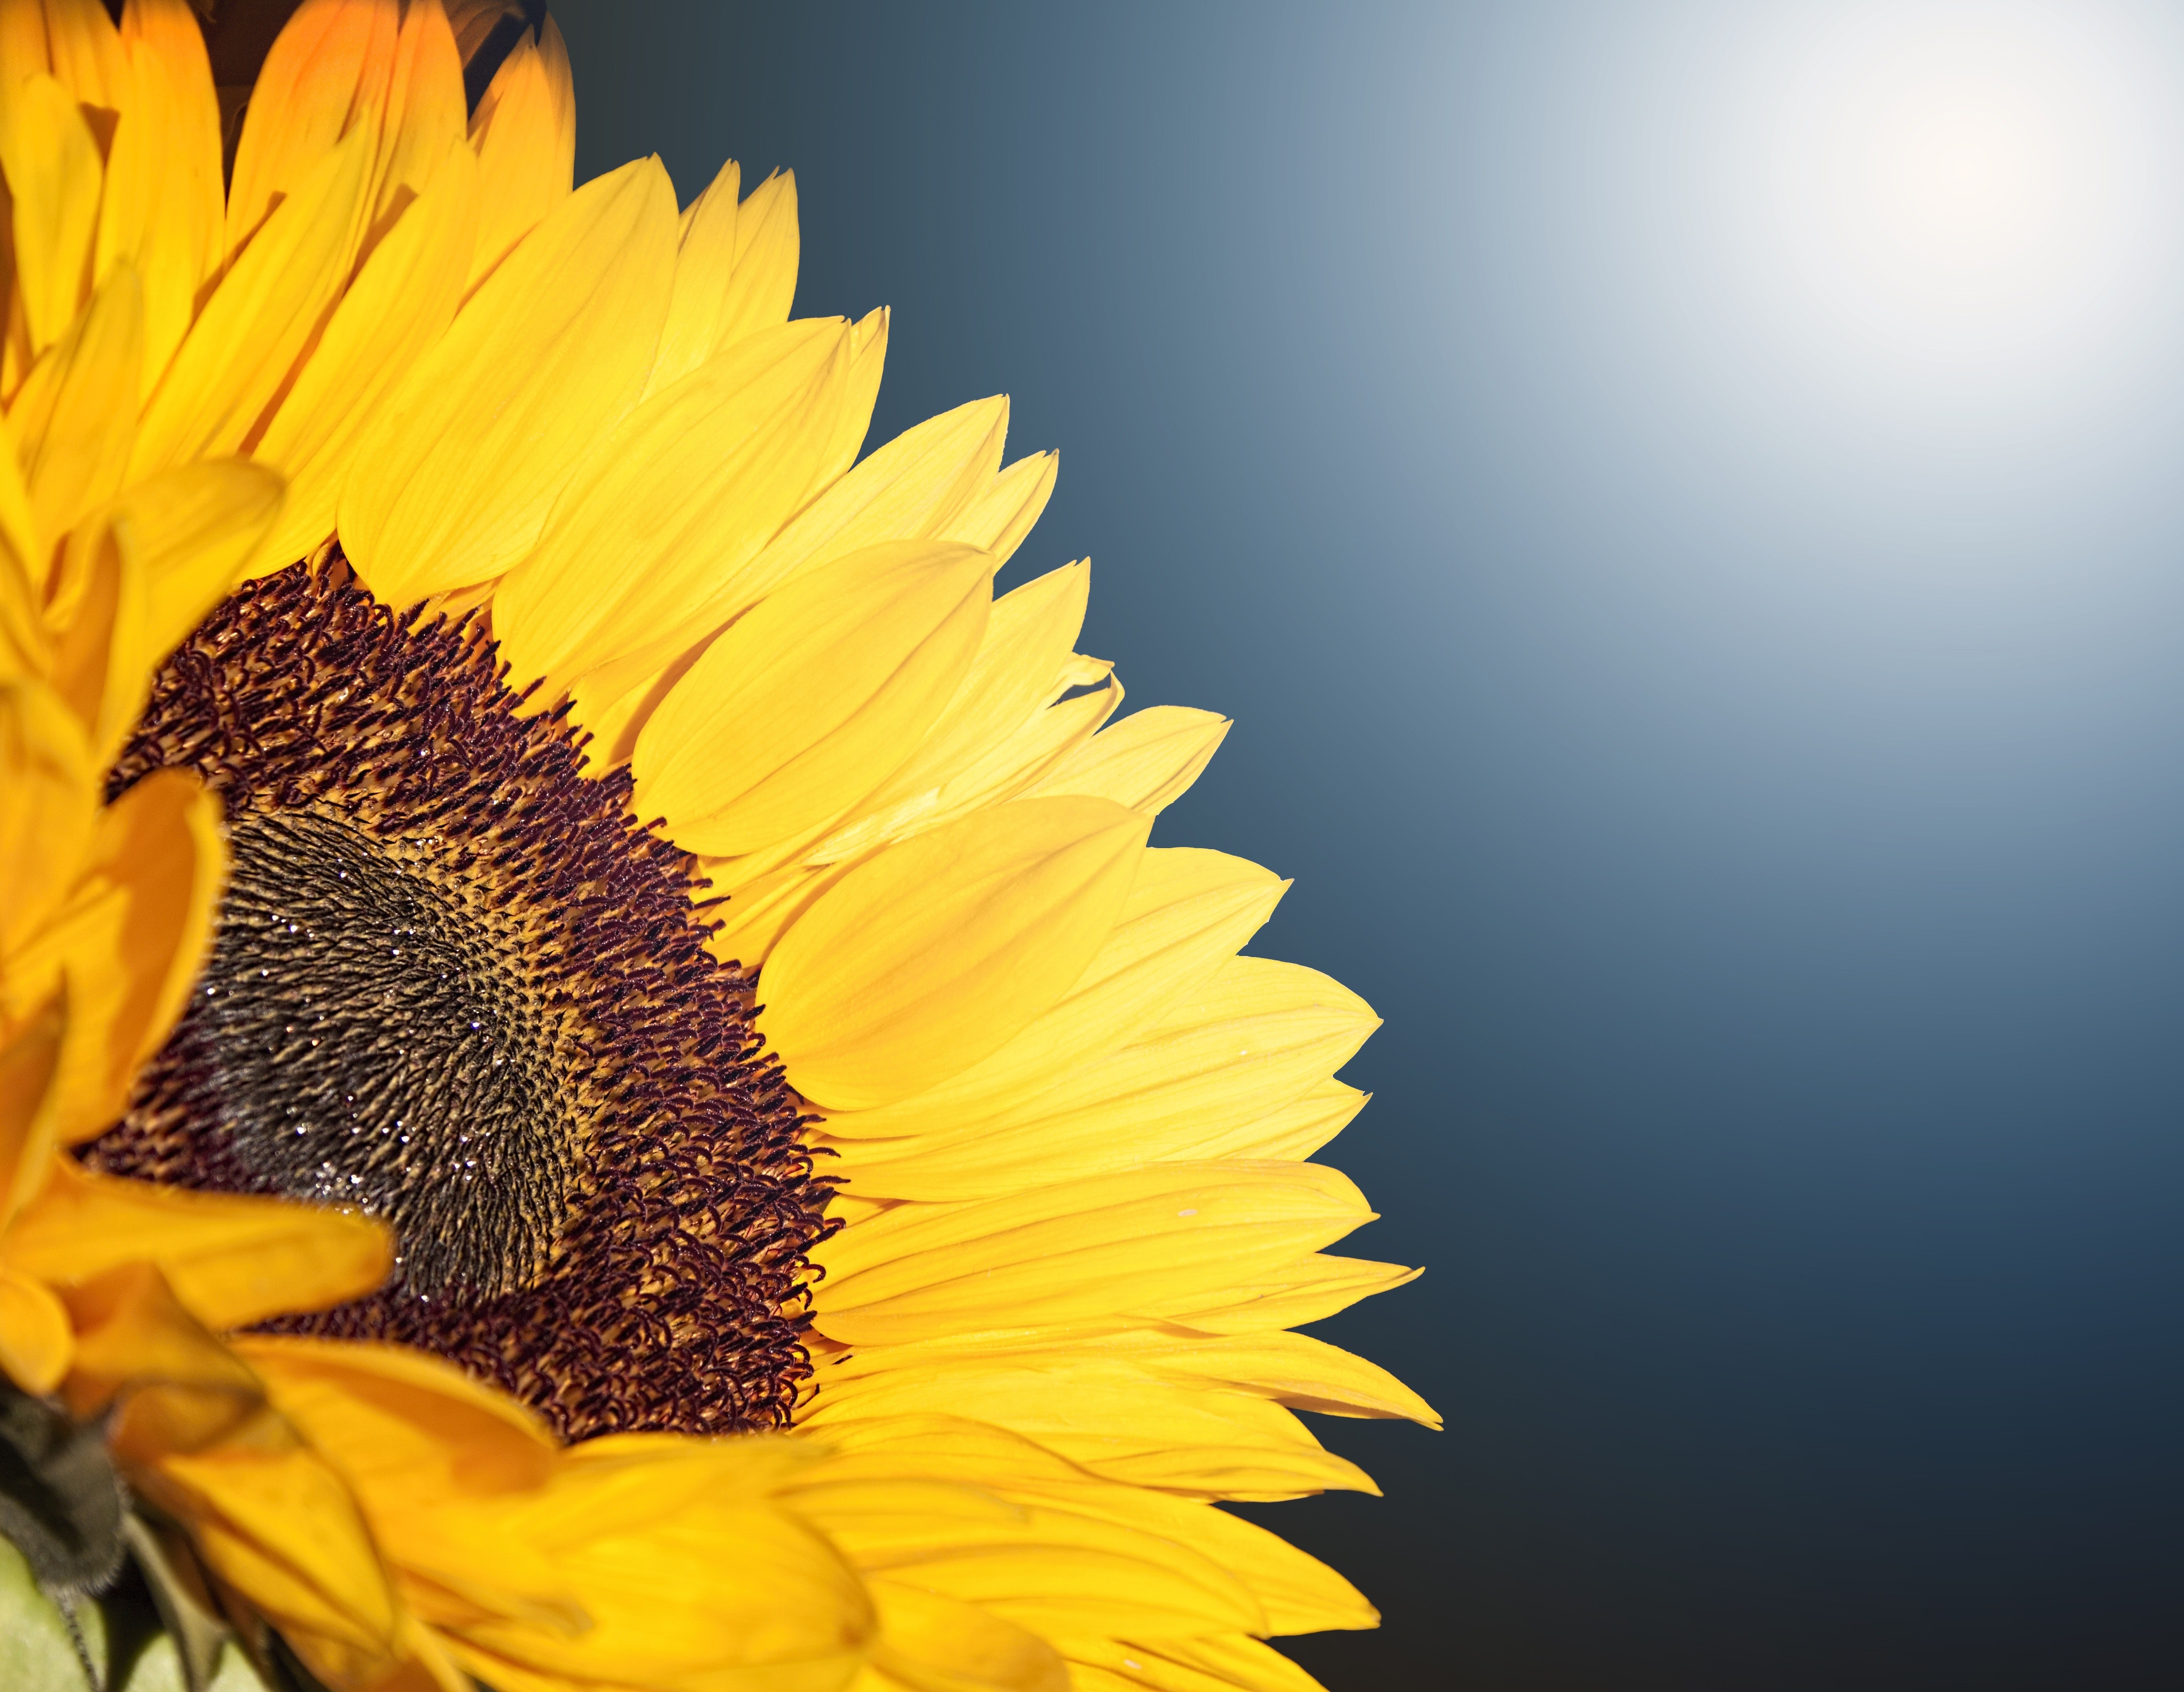 Blossoming Images of Sunflowers · Pexels · Free Stock Photos